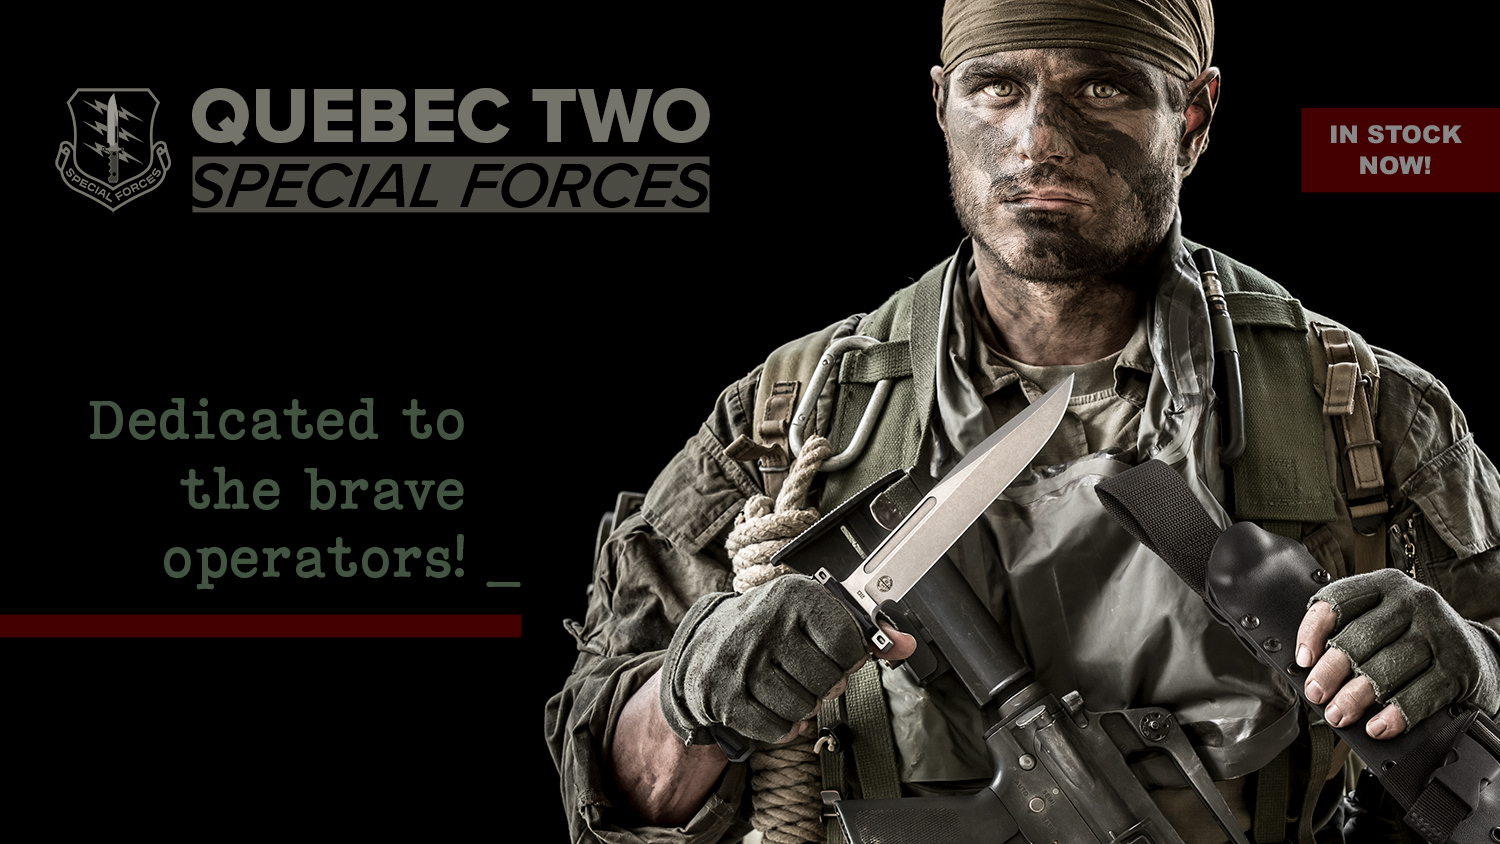 Quebec Two Special Forces